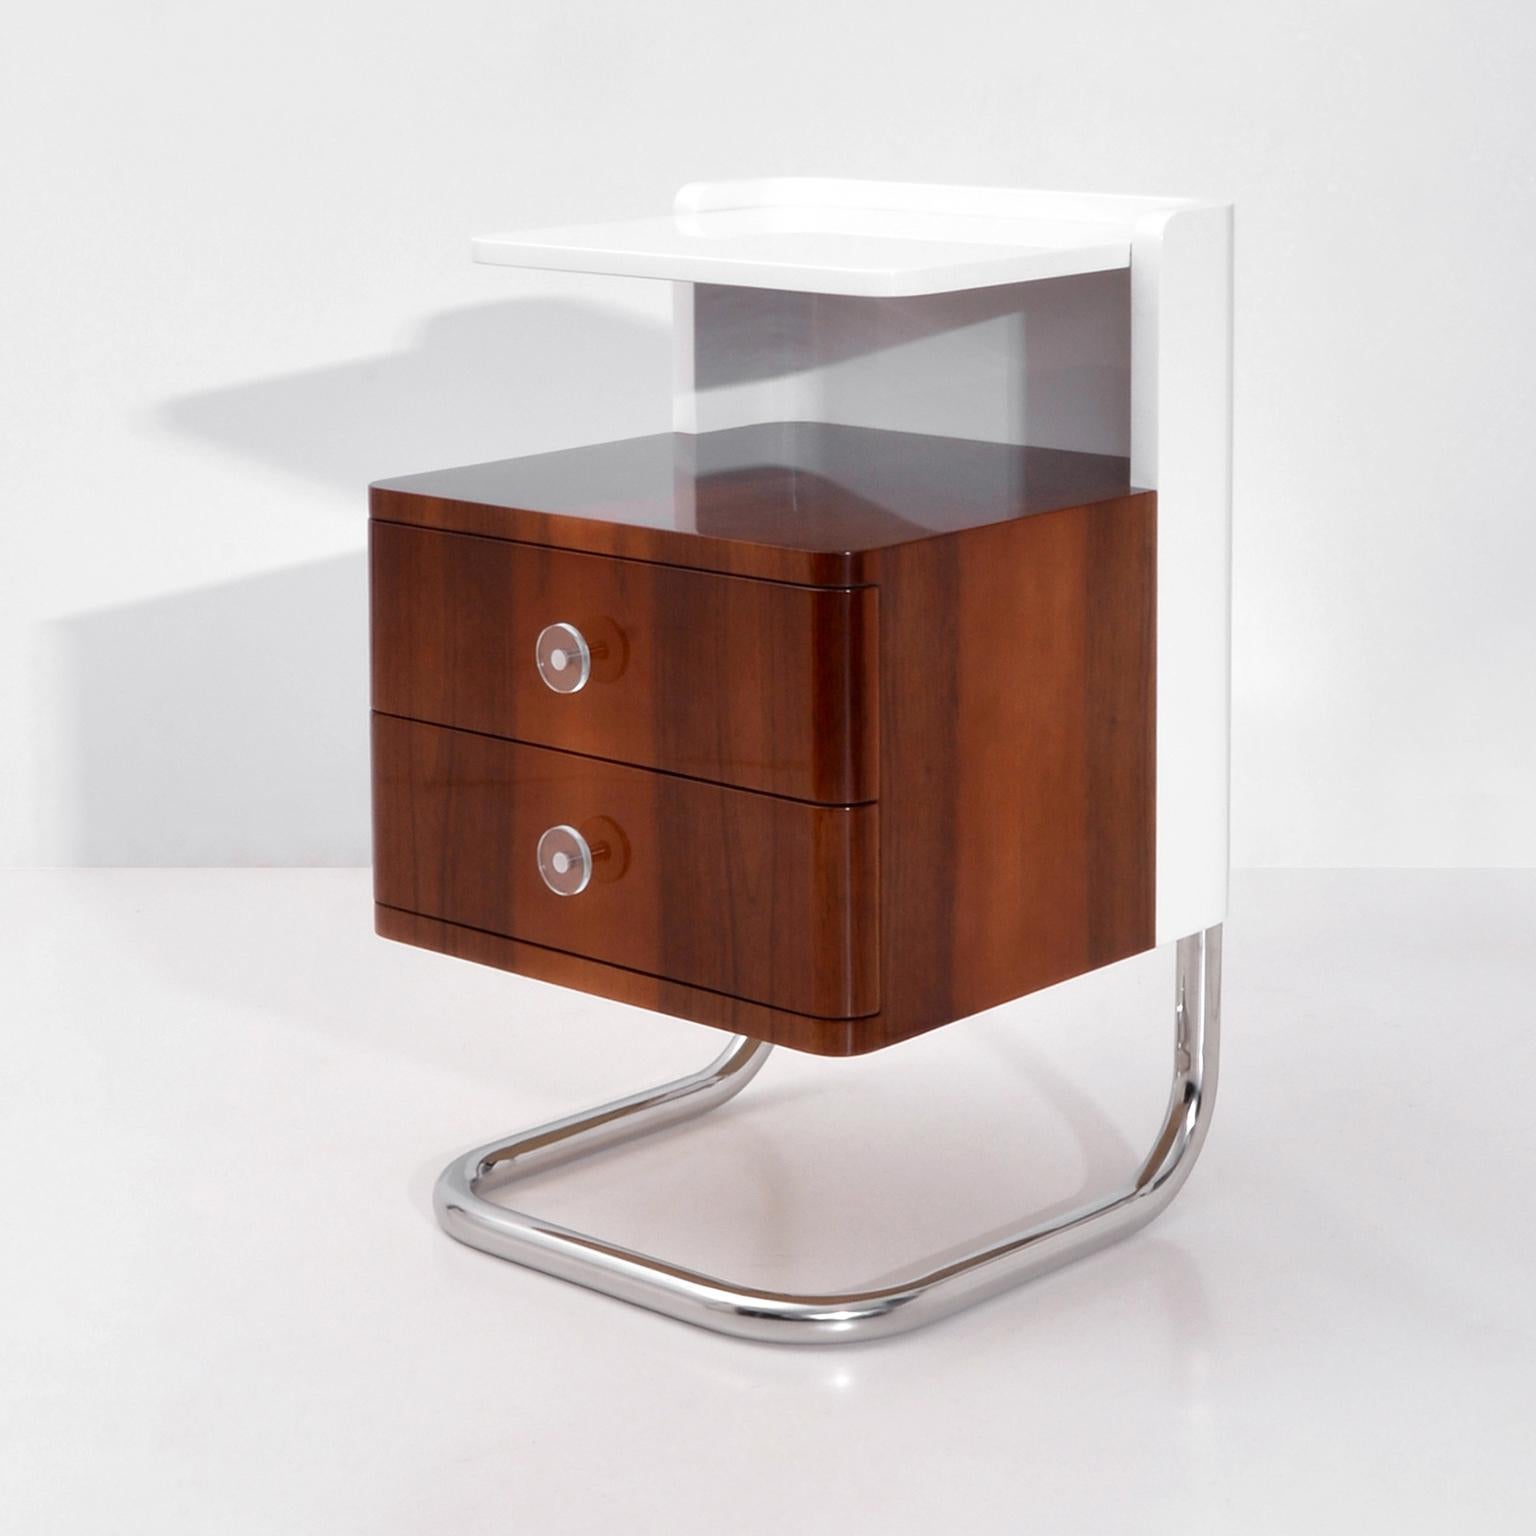 German Modern Contemporary Bespoke Nightstand, High Gloss Lacquered Wood, Tubular Steel For Sale